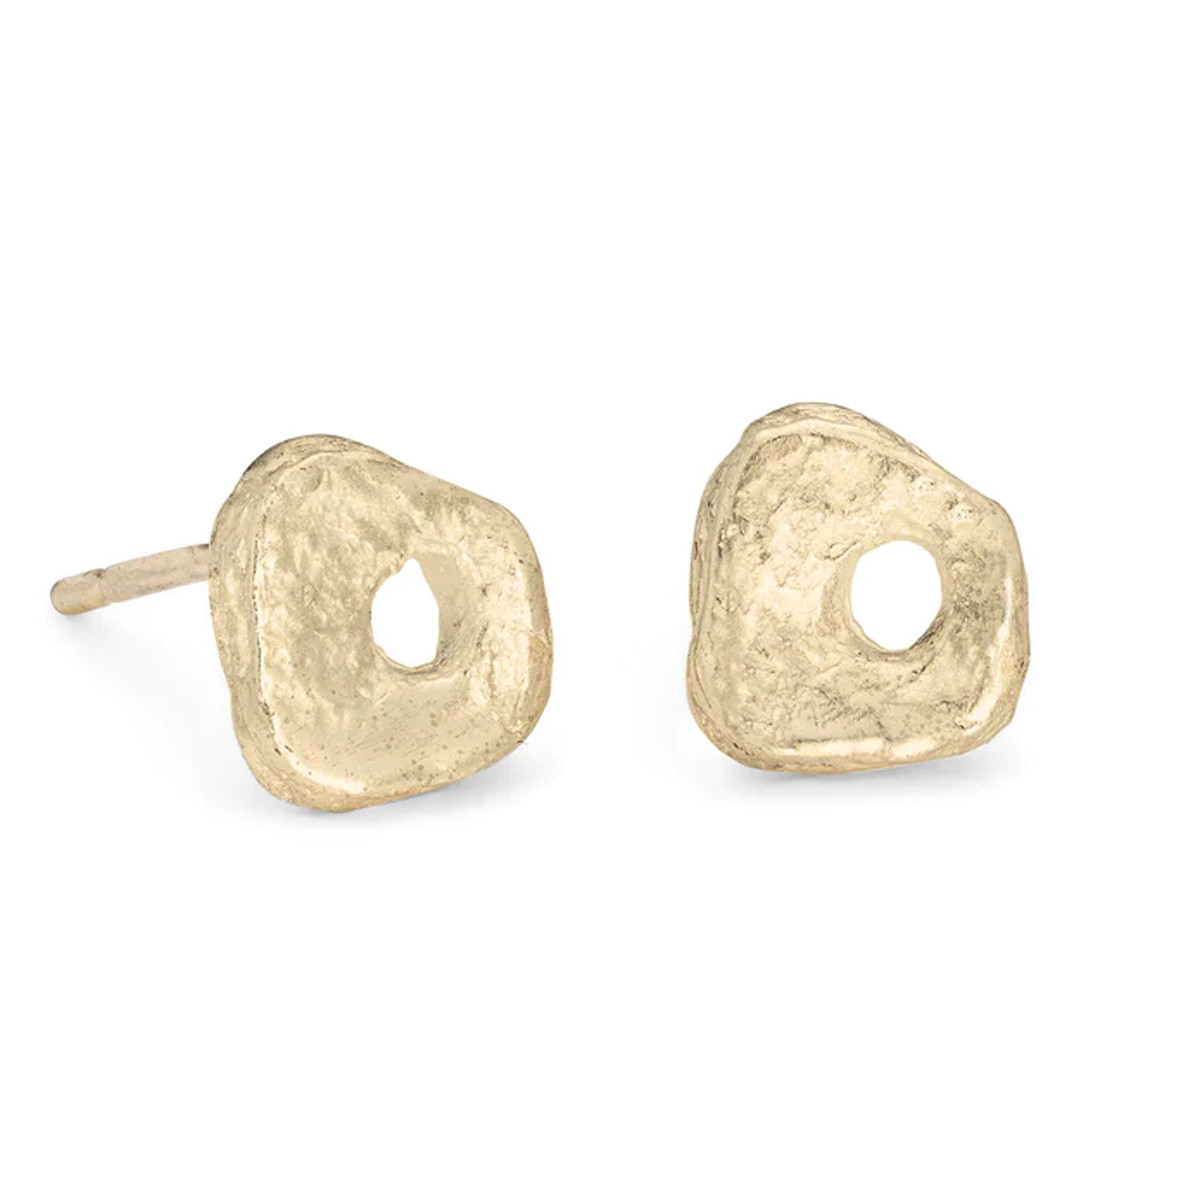 Worn Pebble Studs in 9ct Yellow Gold by Emily Nixon now available at tomfoolery London